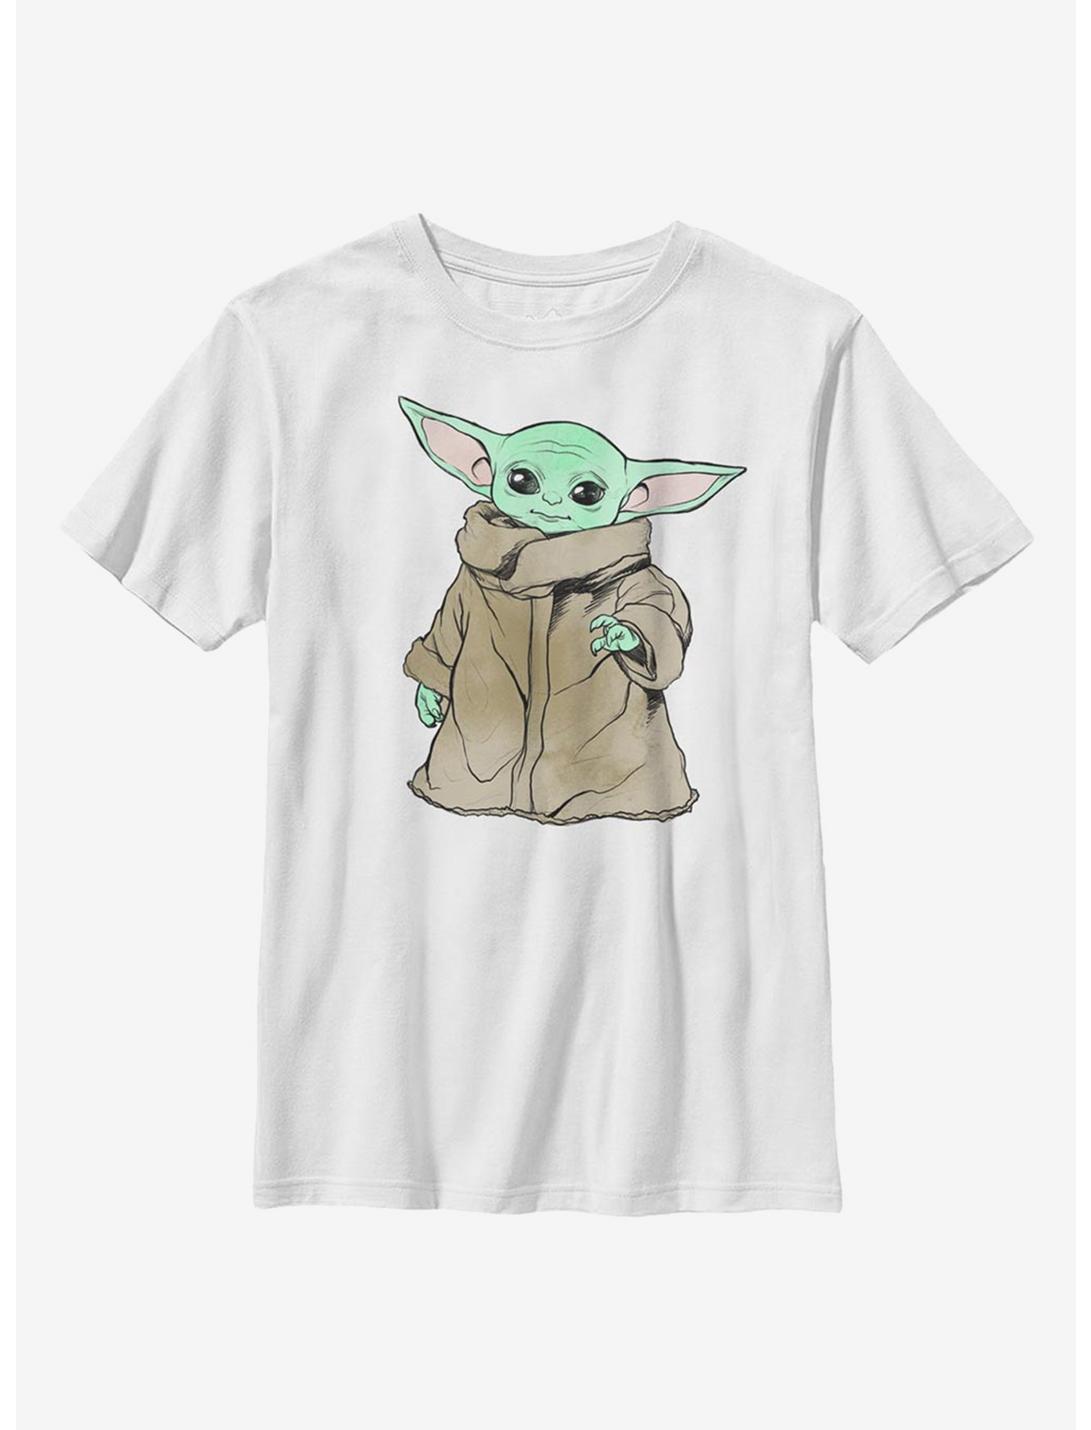 Star Wars The Mandalorian The Child Sketch Simple Youth T-Shirt, WHITE, hi-res